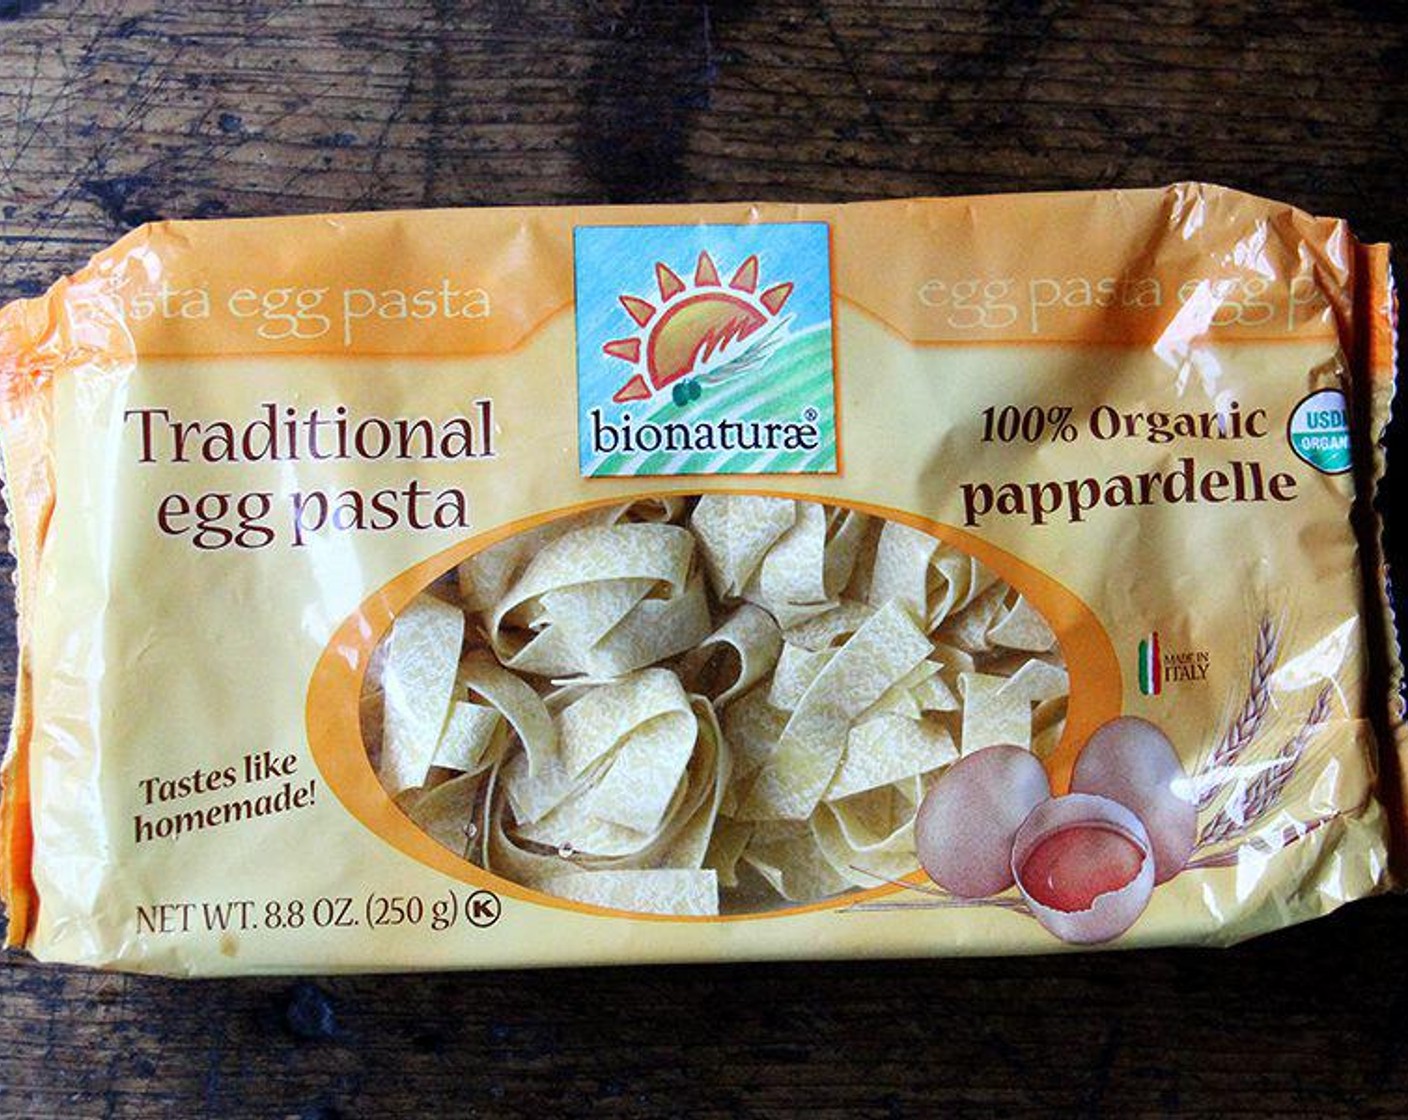 step 5 Add the Pappardelle Pasta (8 oz) to boiling water and cook according to package instructions. Reserve ½ cup (or more) of the pasta cooking liquid.